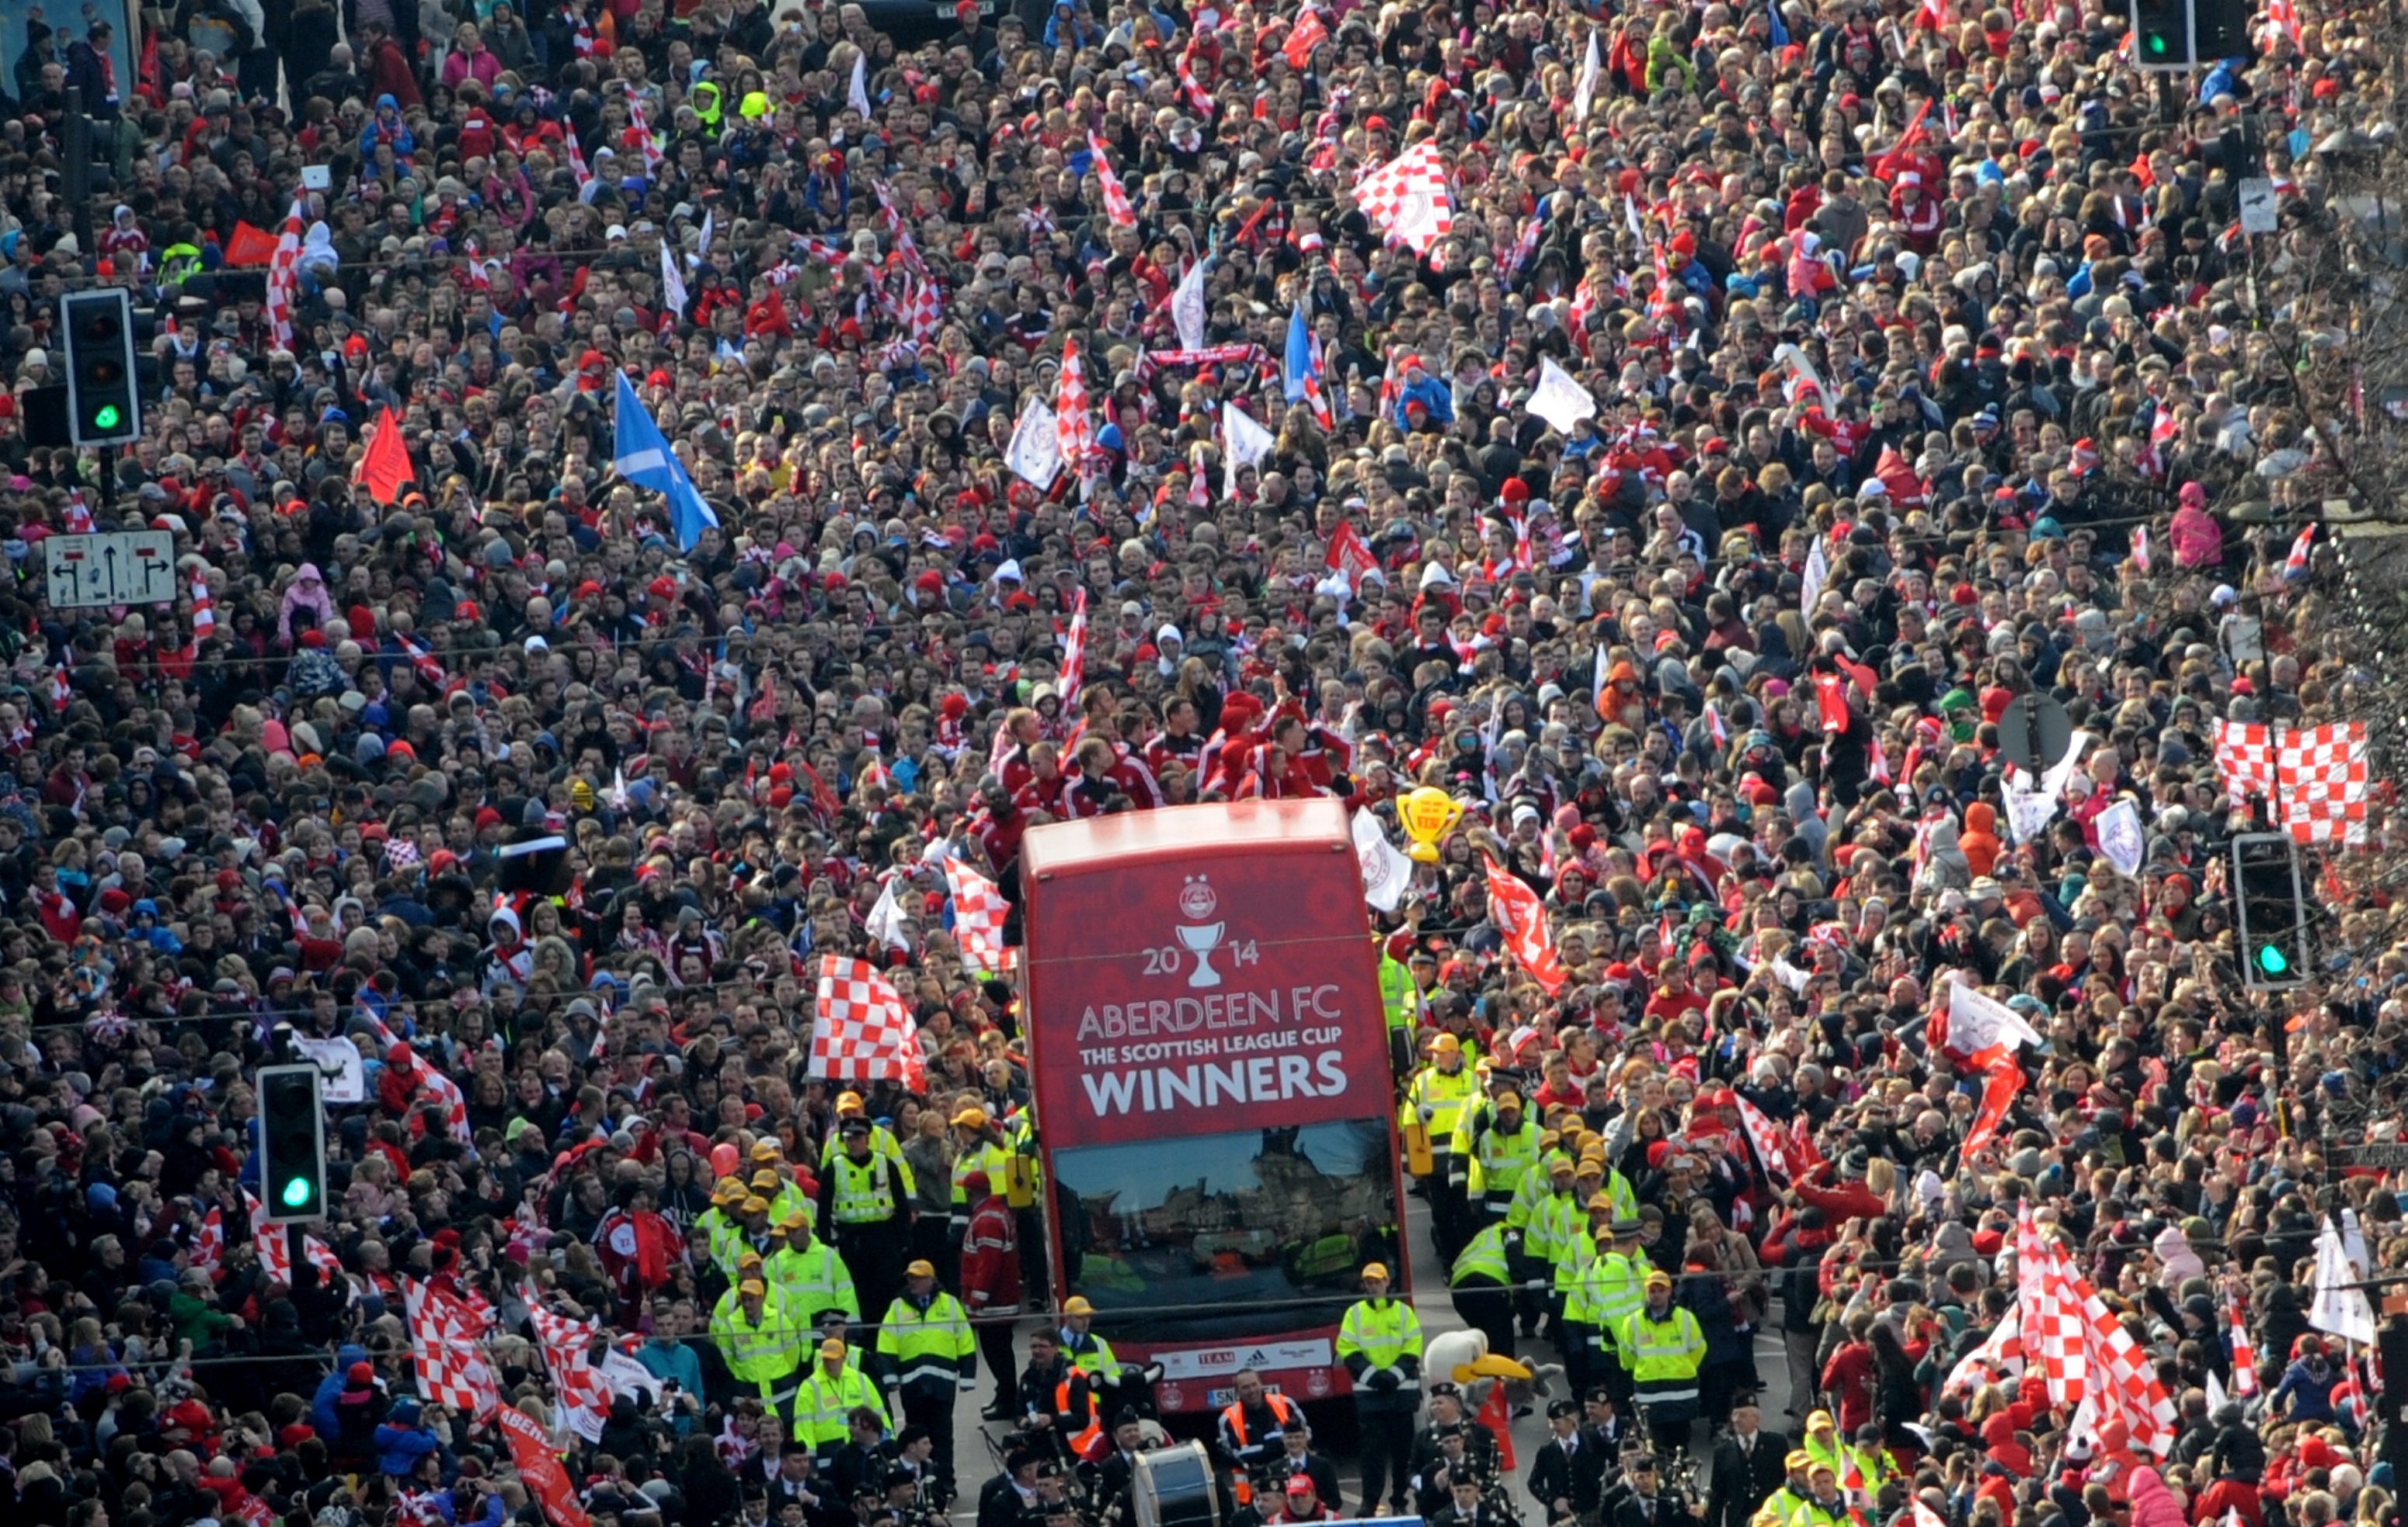 Dons fans will be able to call on extra trains as the head to Hampden hoping for a repeat of their 2014 triumph.